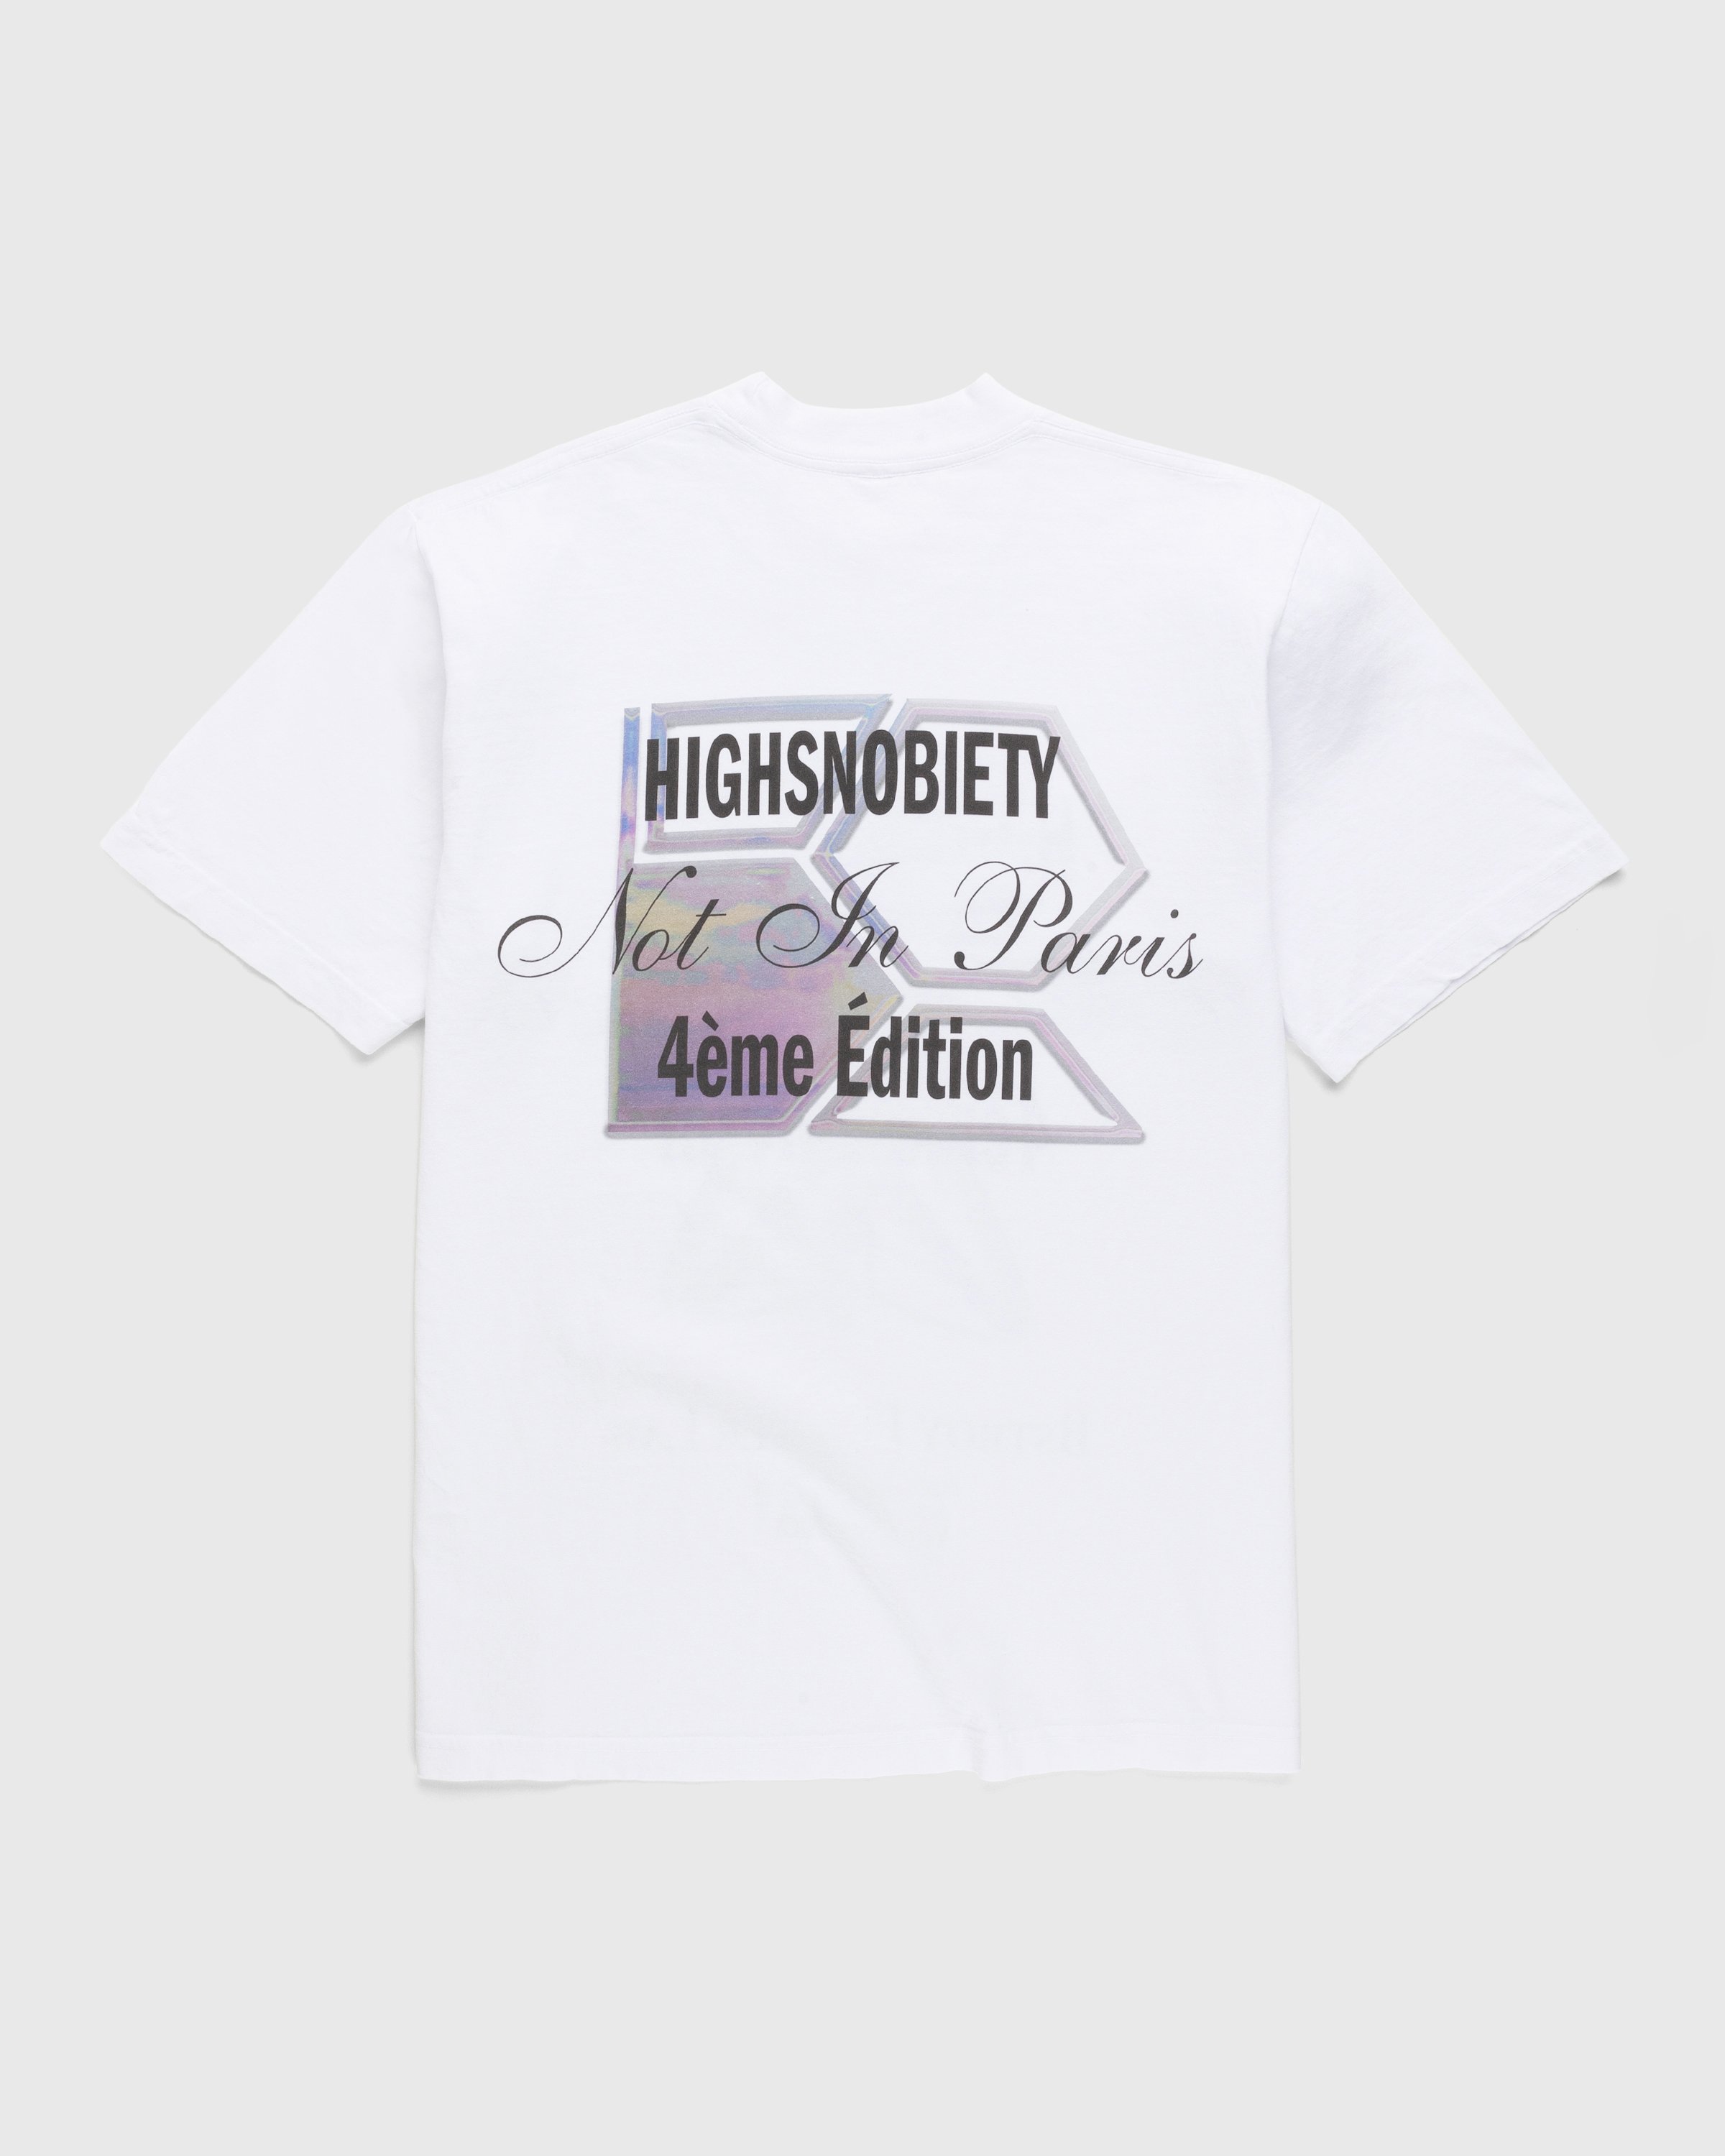 Bstroy x Highsnobiety - Not In Paris 4 Flower T-Shirt White - Clothing - White - Image 2